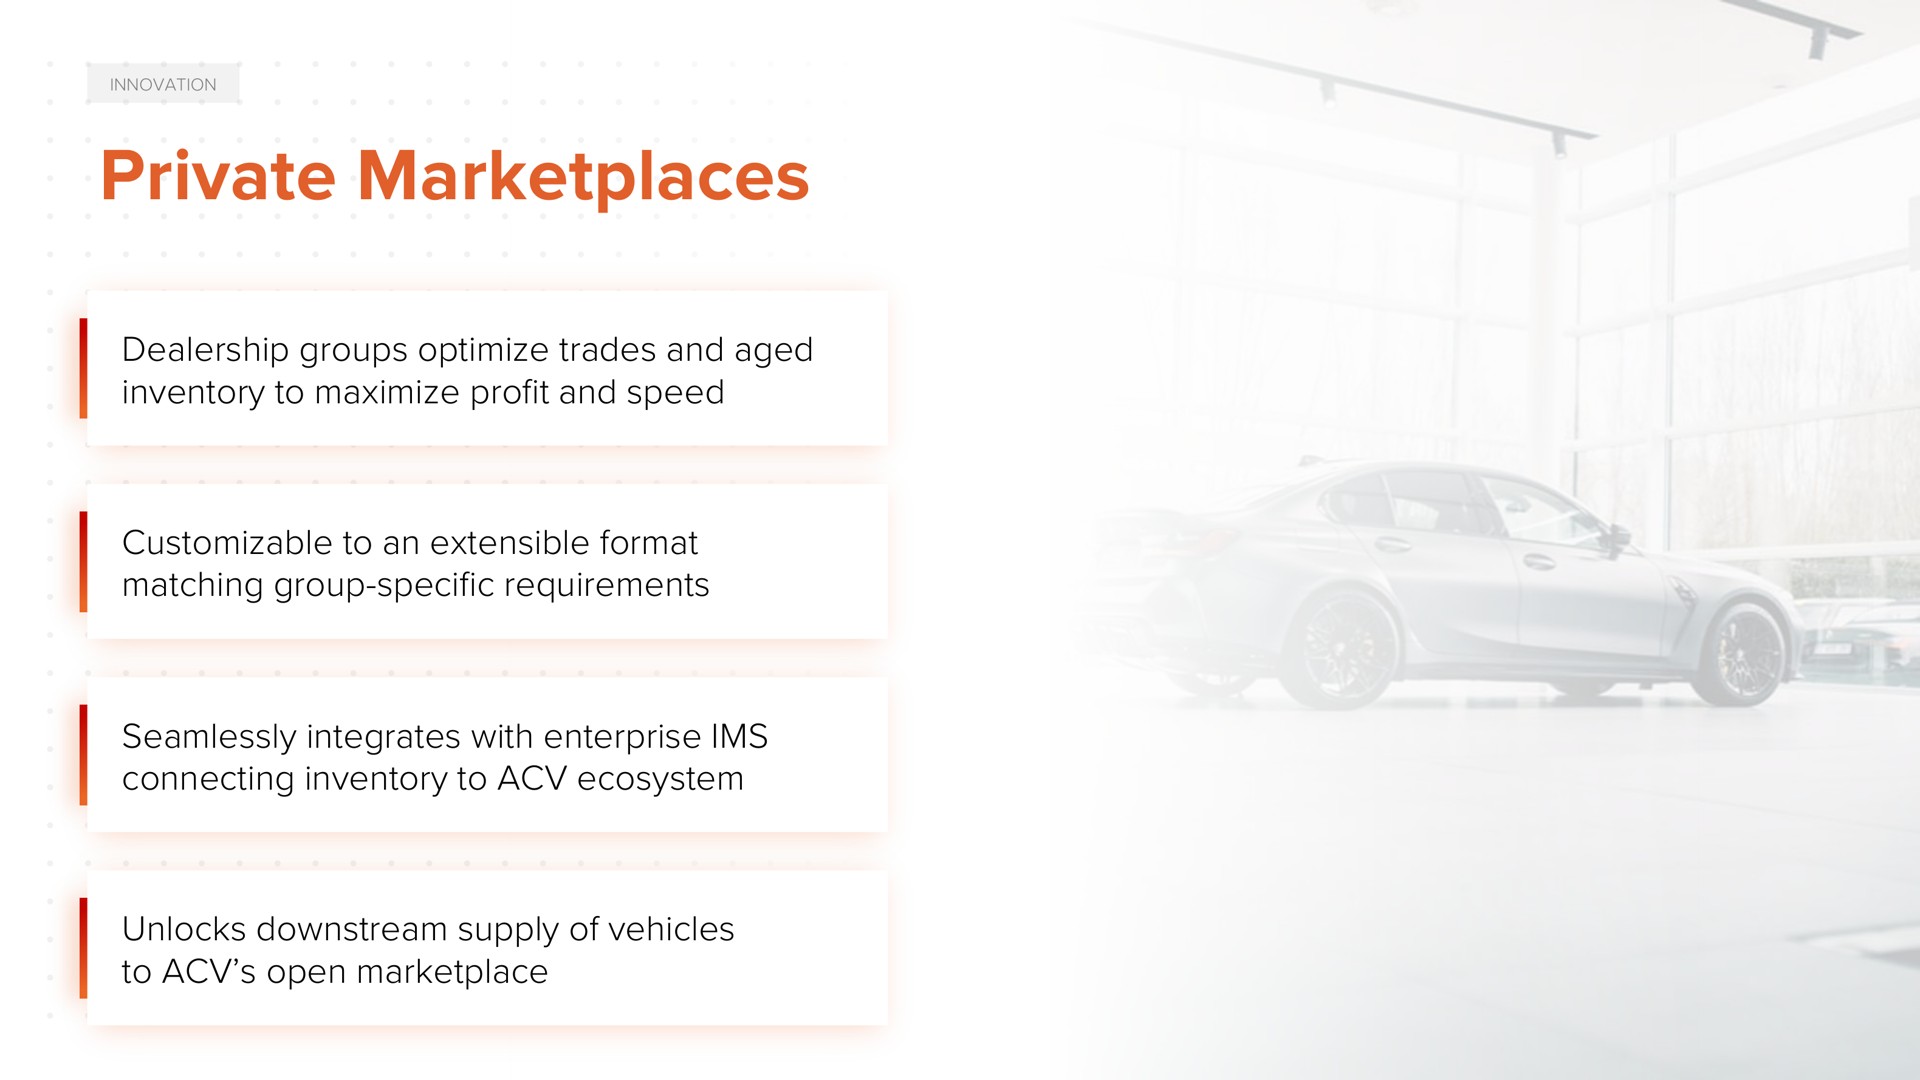 private dealership groups optimize trades and aged inventory to maximize profit and speed to an extensible format matching group specific requirements seamlessly integrates with enterprise connecting inventory to ecosystem unlocks downstream supply of vehicles to open | ACV Auctions